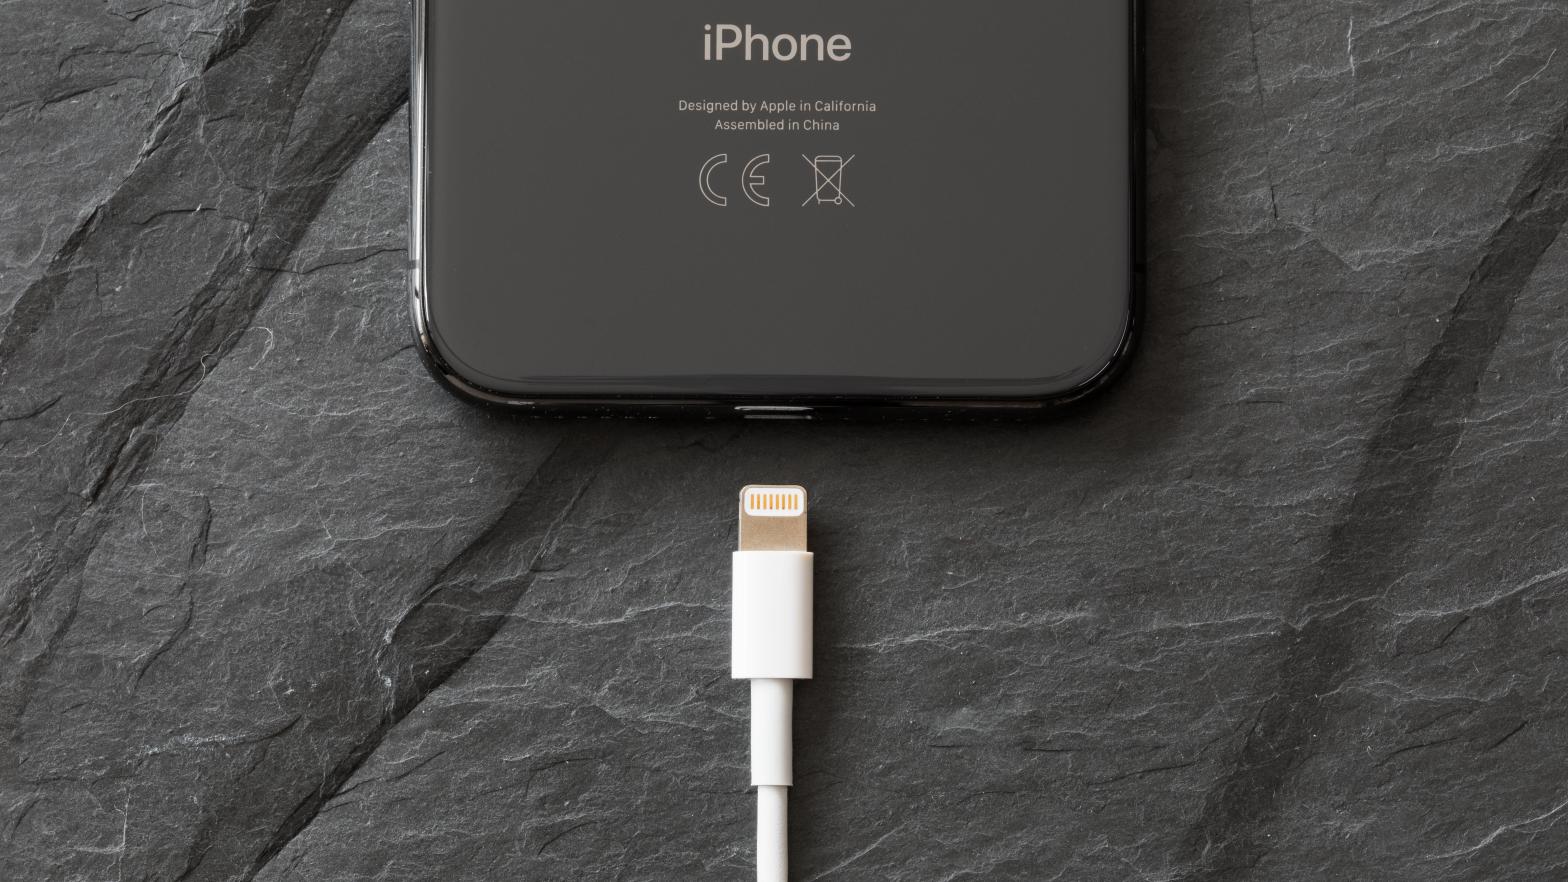 Apple's iPhones have stuck with the Lightning charging port even though the majority of other devices have switched to USB-C. (Photo: Kaspars Grinvalds, Shutterstock)